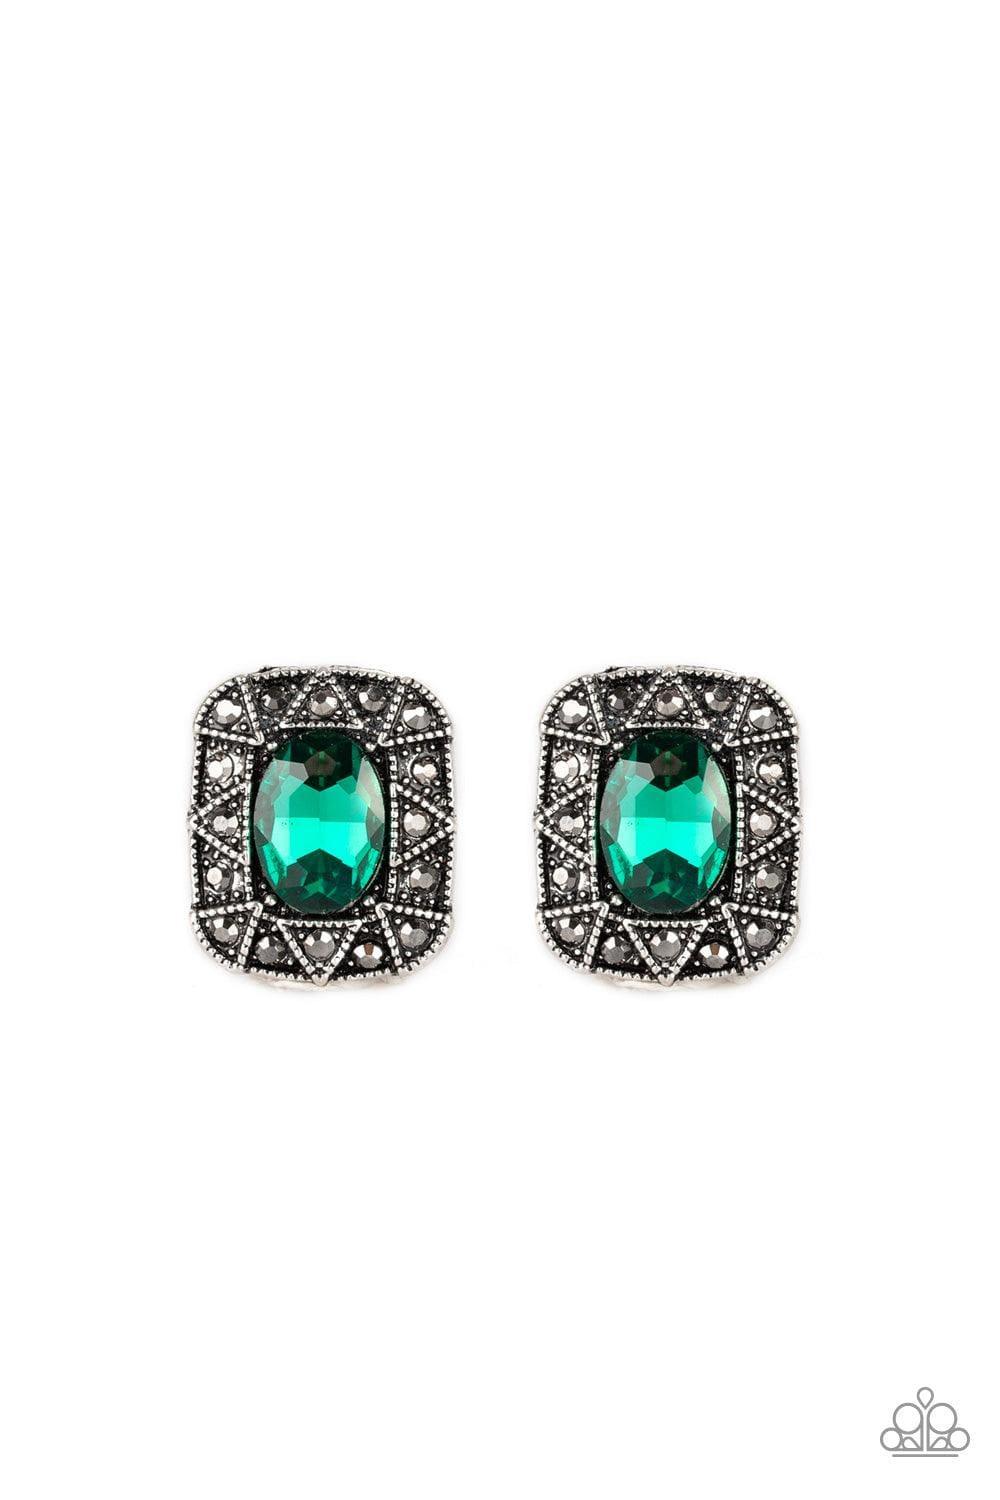 Paparazzi Accessories - Young Money - Green Stud Earrings - Bling by JessieK